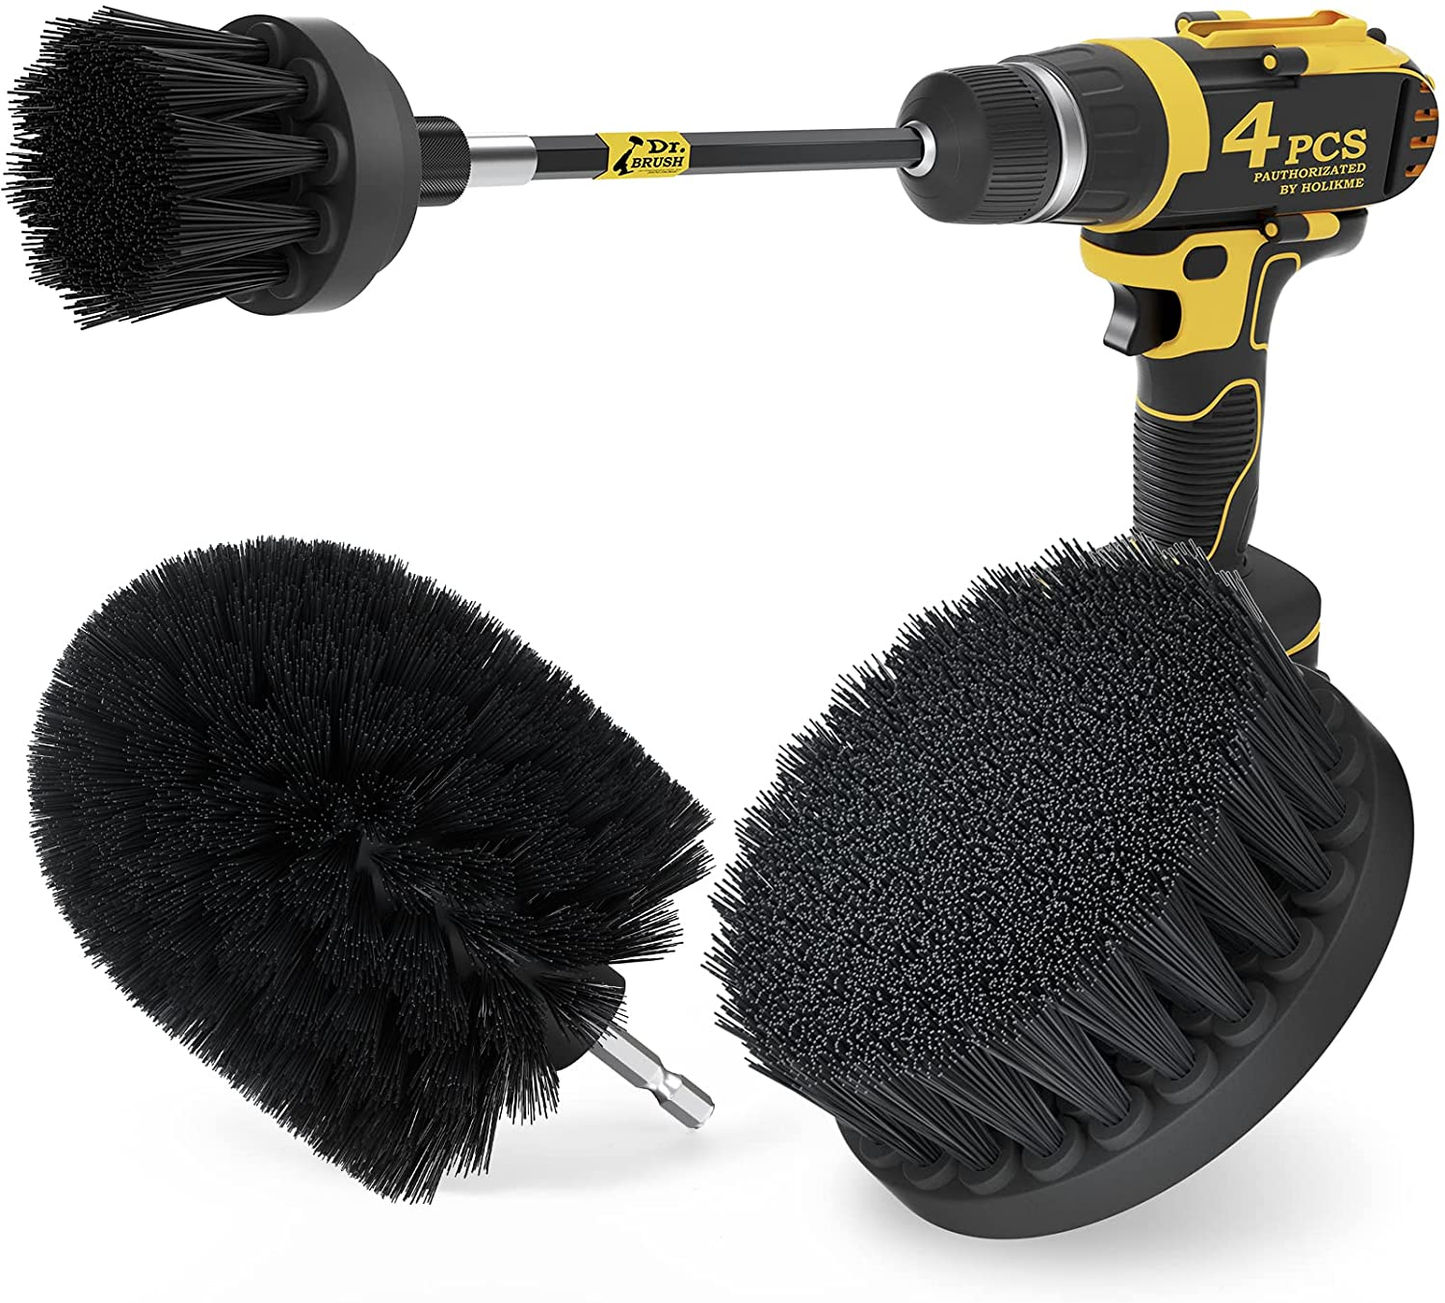 4Pack Drill Brush Power Scrubber Cleaning Brush Extended Long Attachment Set All Purpose Drill Scrub Brushes Kit for Grout, Floor, Tub, Shower, Tile, Bathroom and Kitchen Surface Black